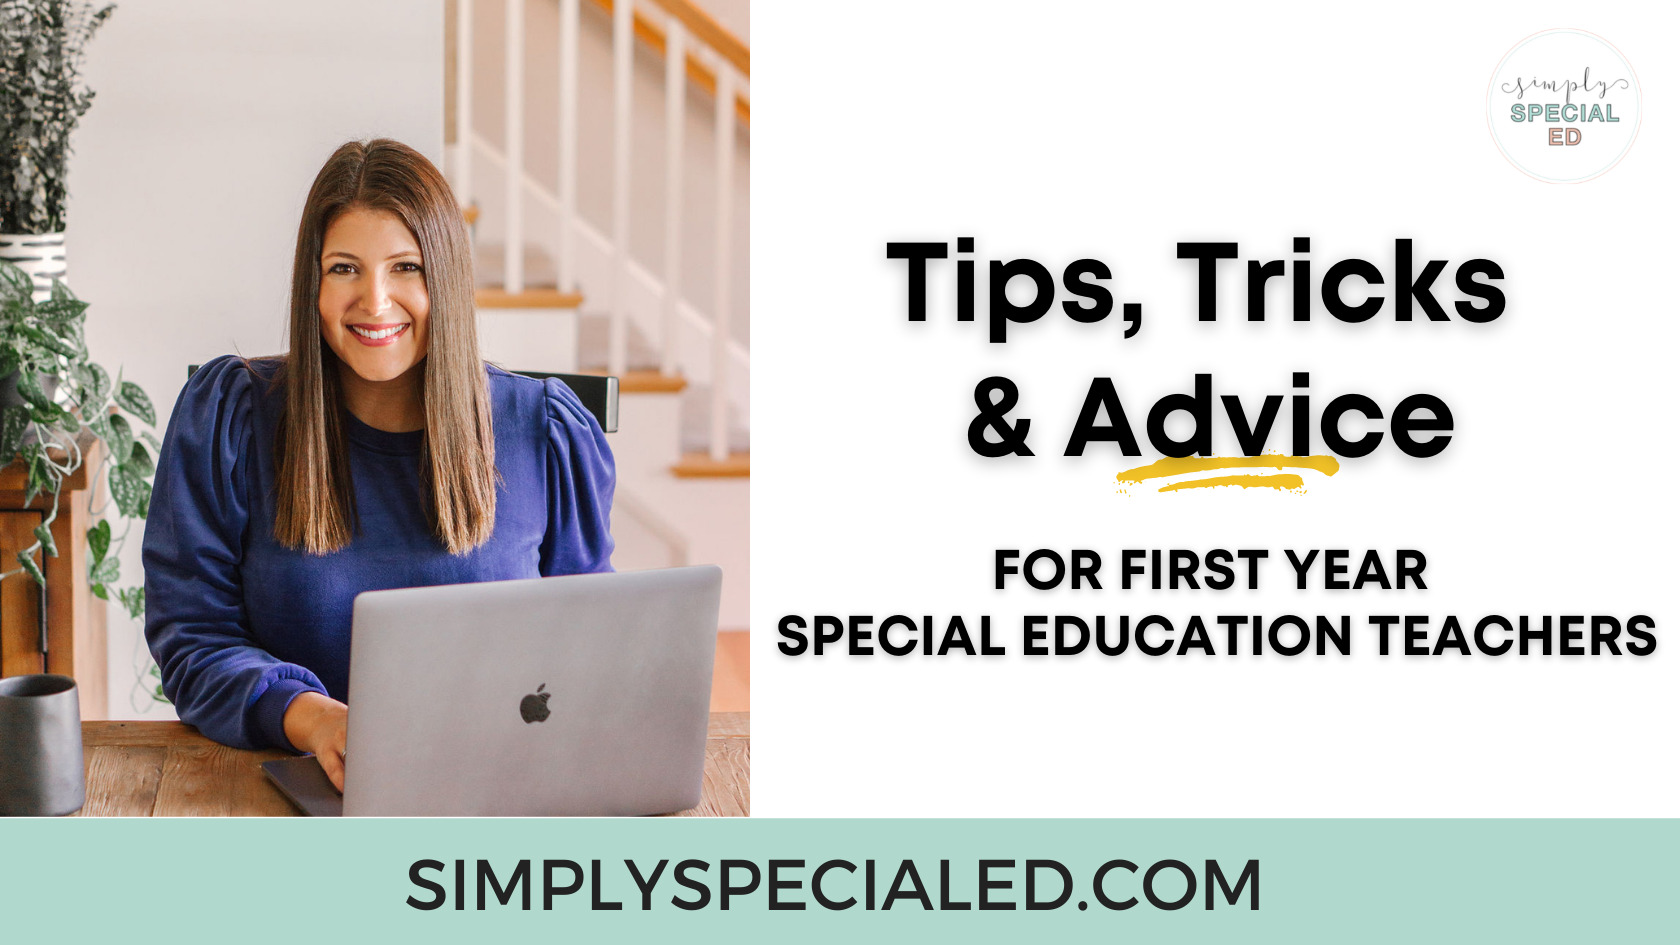 header image for tips, tricks and advice for first year special education teachers